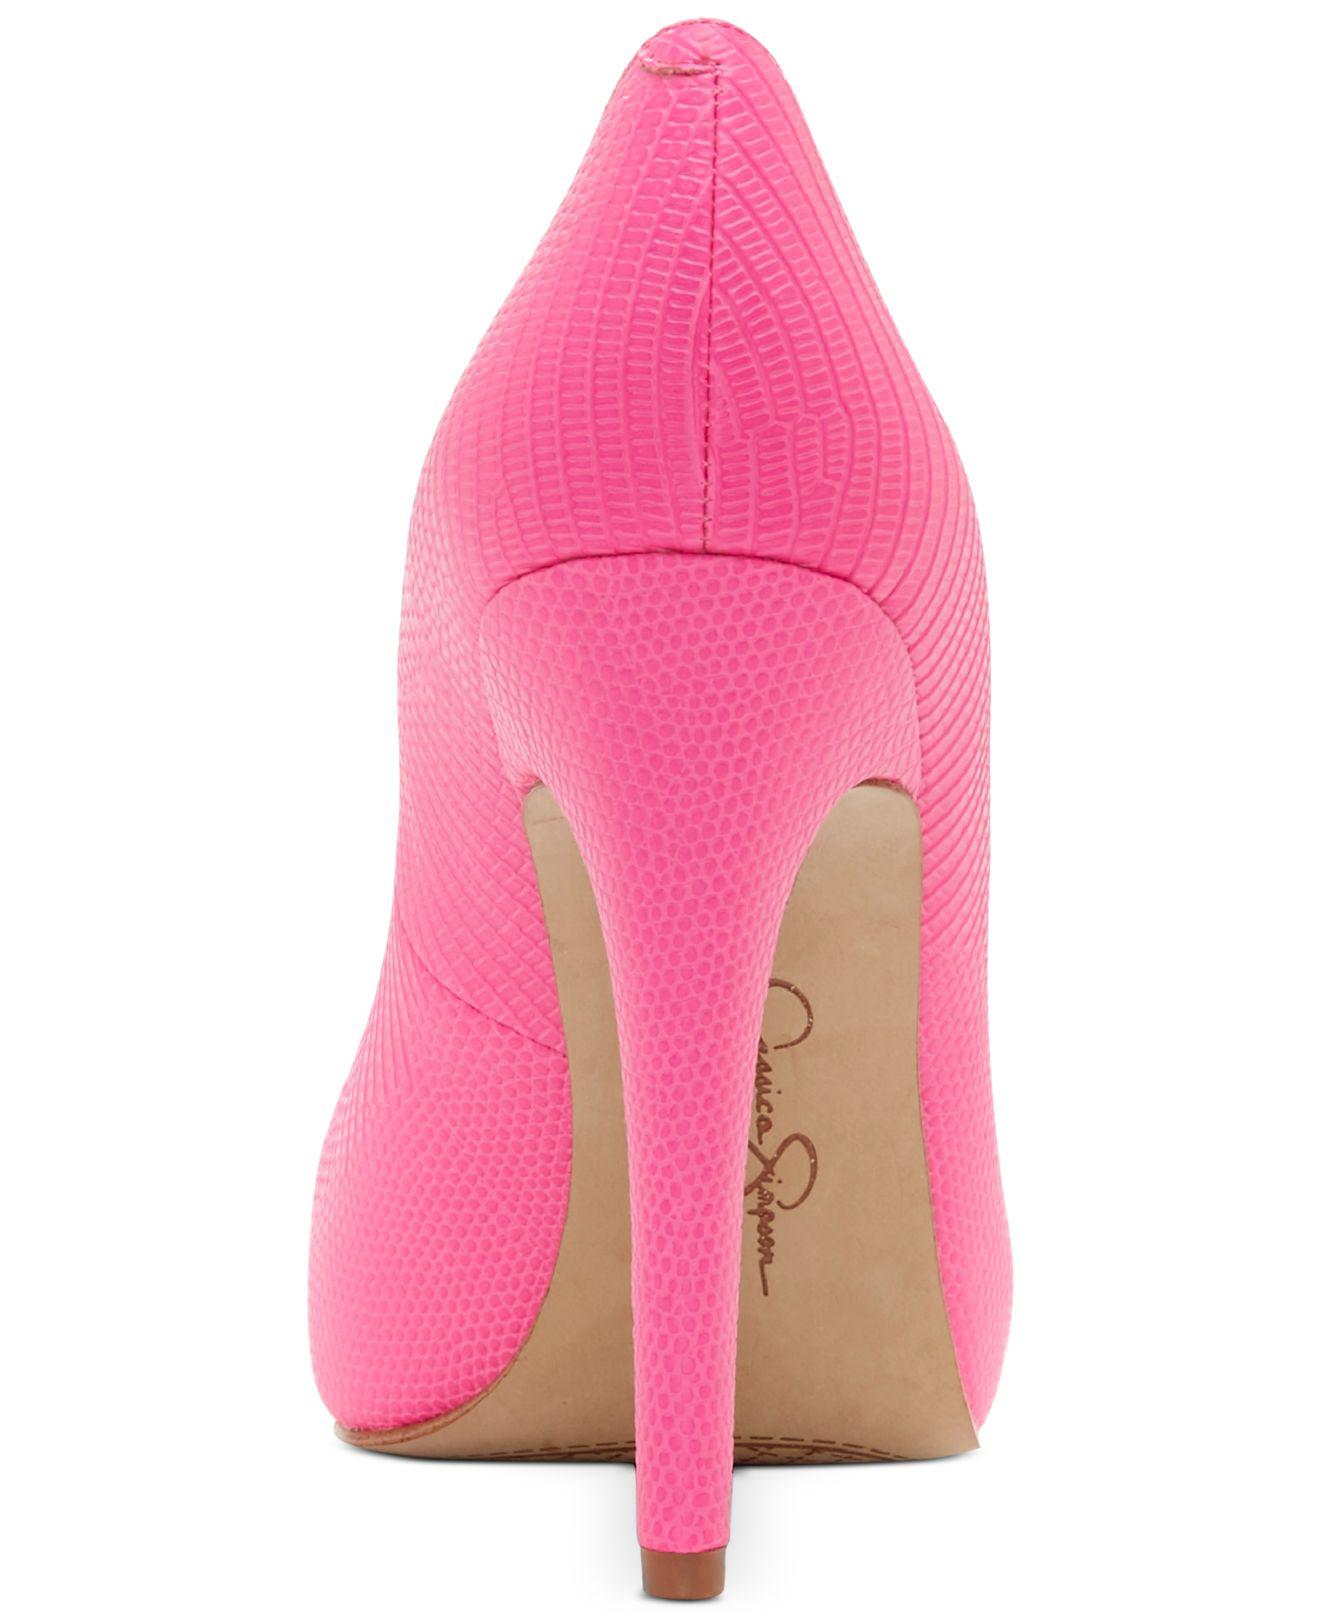 Jessica Simpson Synthetic Parisah Platform Pumps in Ultra Pink (Pink) | Lyst